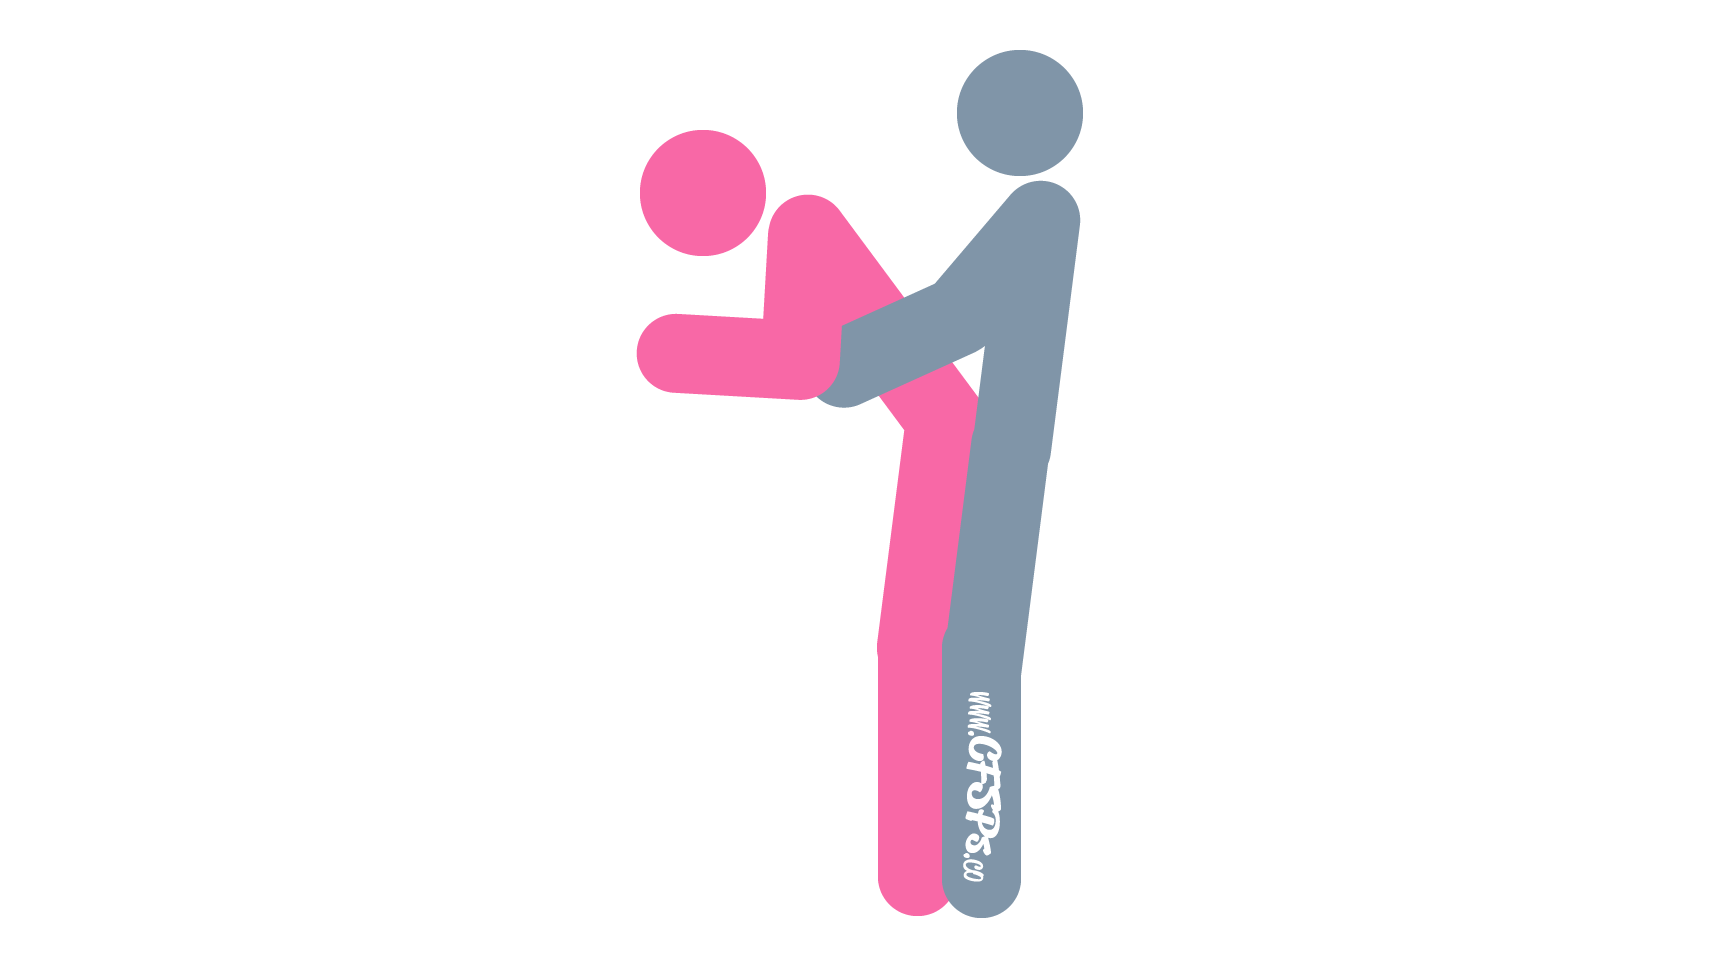 This stick figure image depicts a man and woman having sex in the Take Me Now sex position. The woman is standing and leaning on a table or counter while supporting herself with her forearms on the table or counter. The man is standing behind her with his arms around her waist or caressing her breasts.